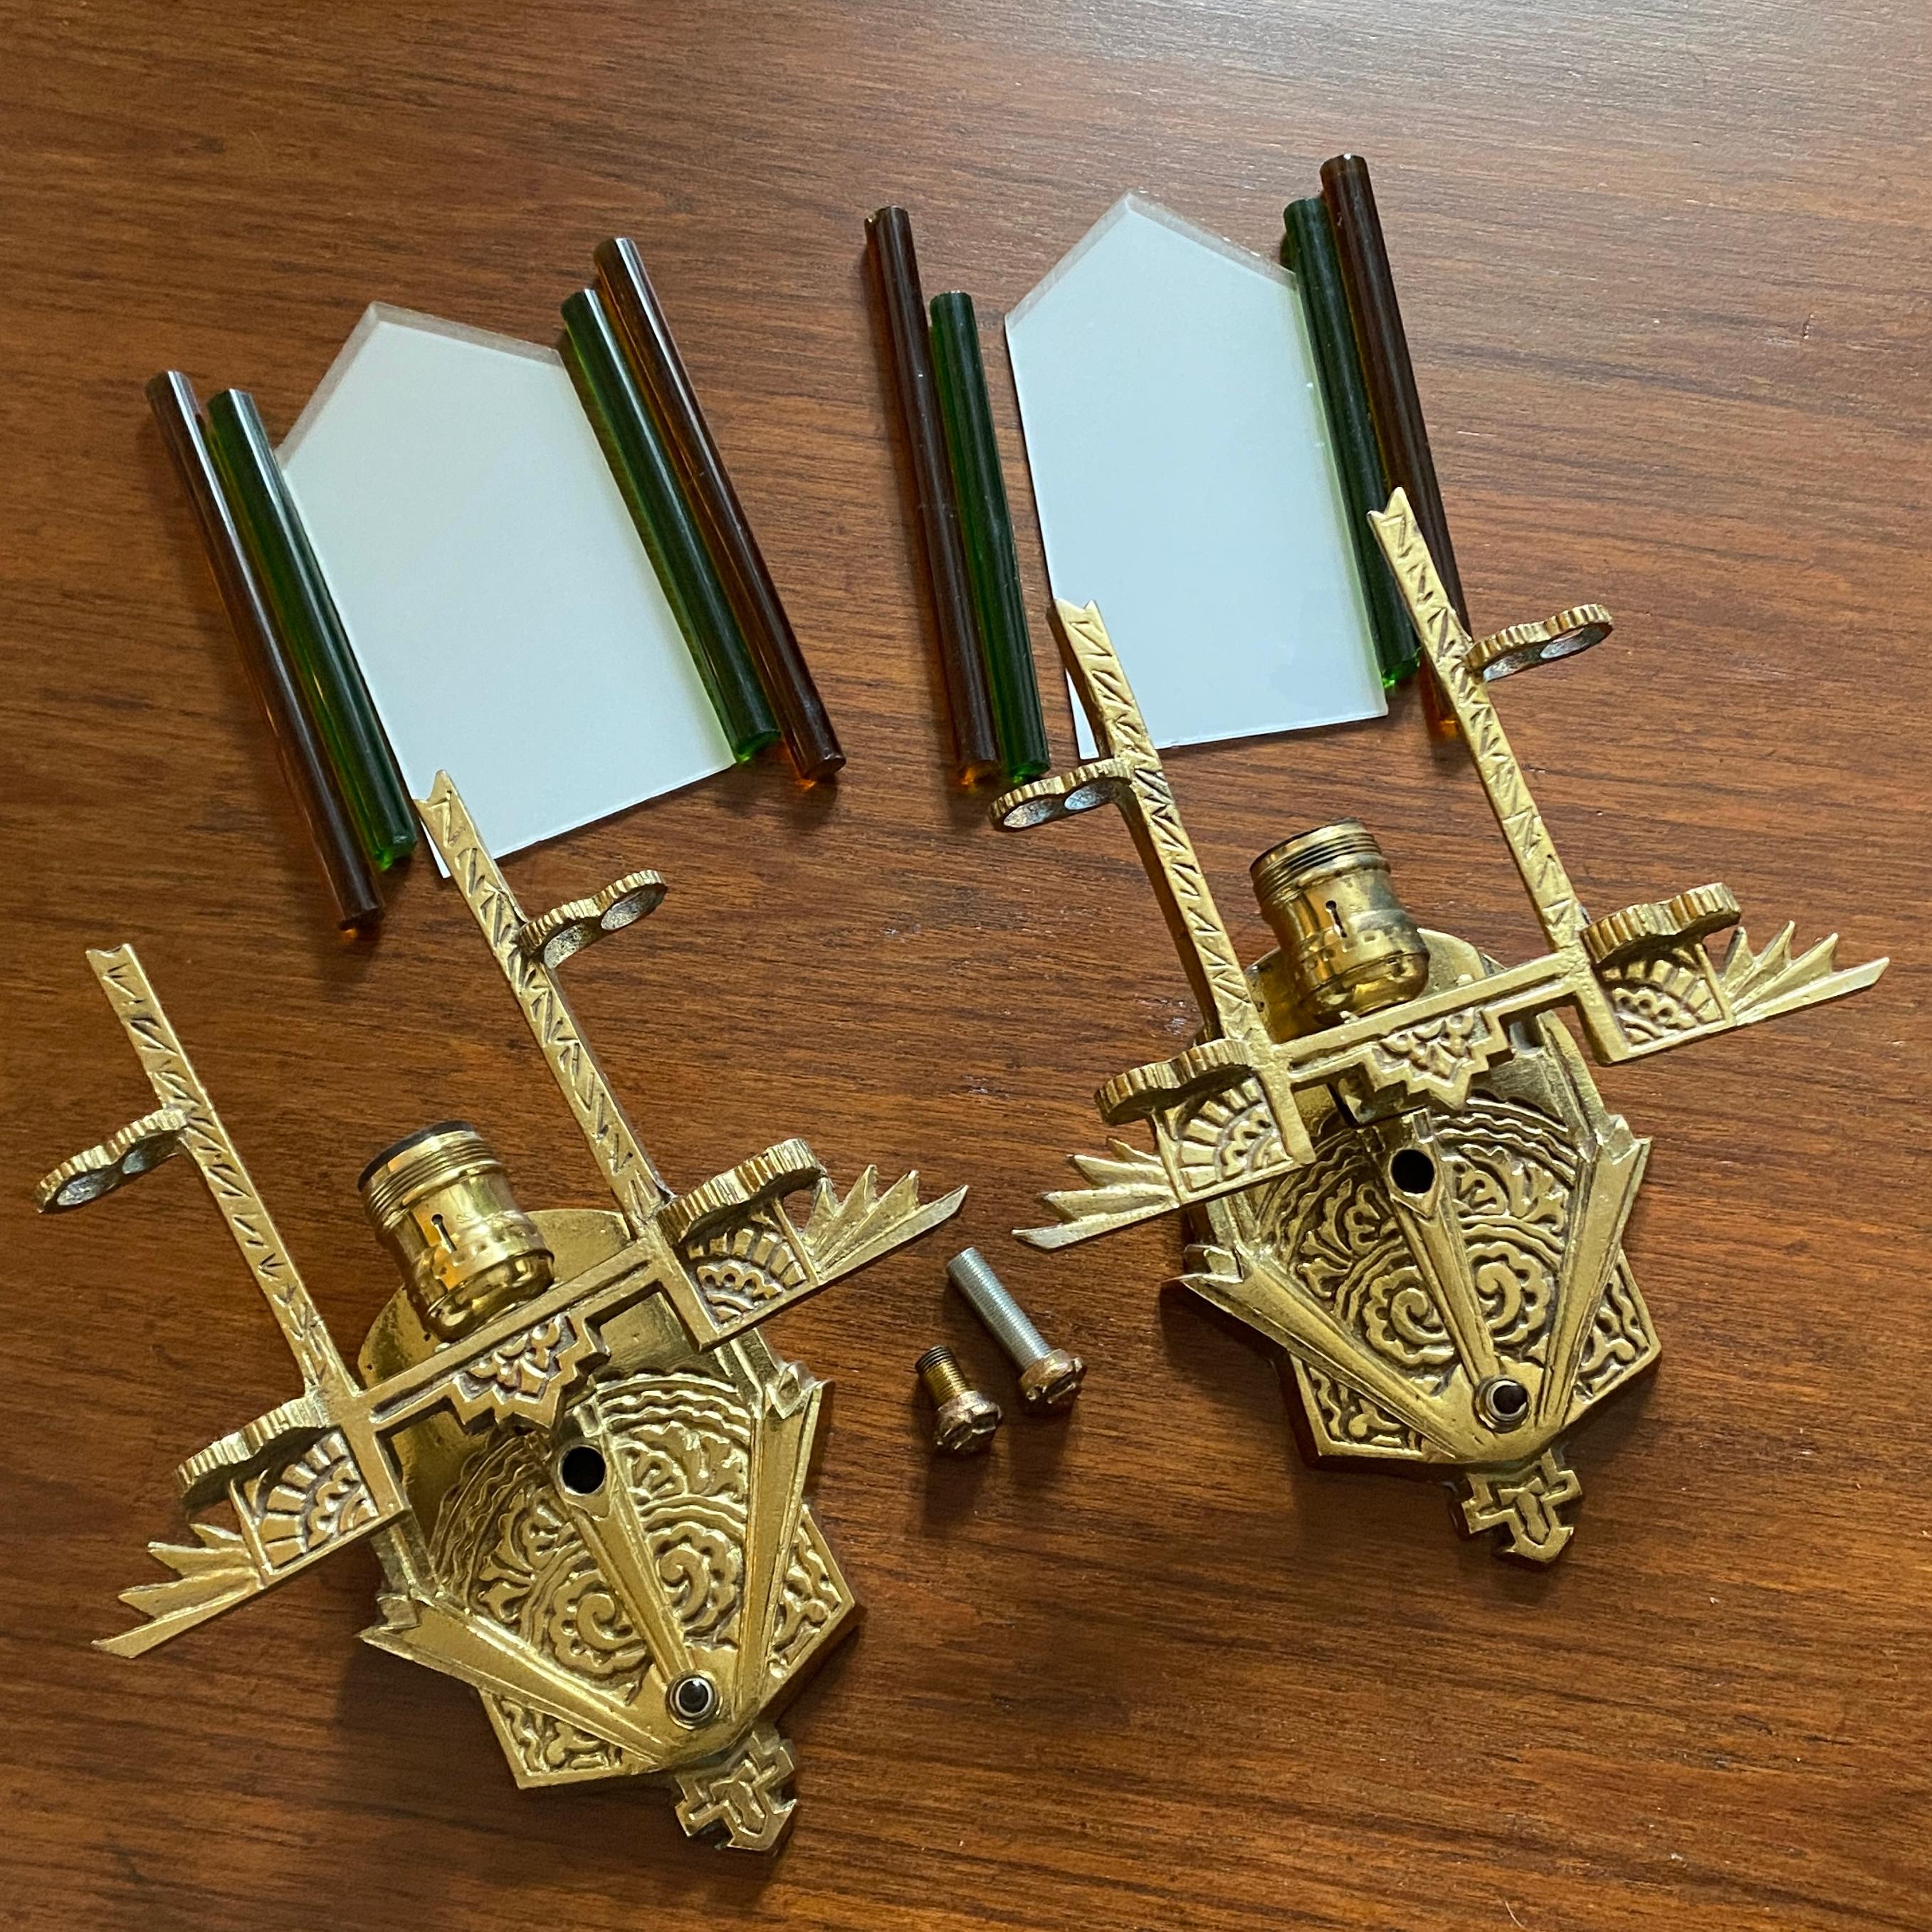 A pair of vintage Art Deco style brass electric wall sconces with white glass shades and orange and green glass rods on either side. Manufacturer unknown. 